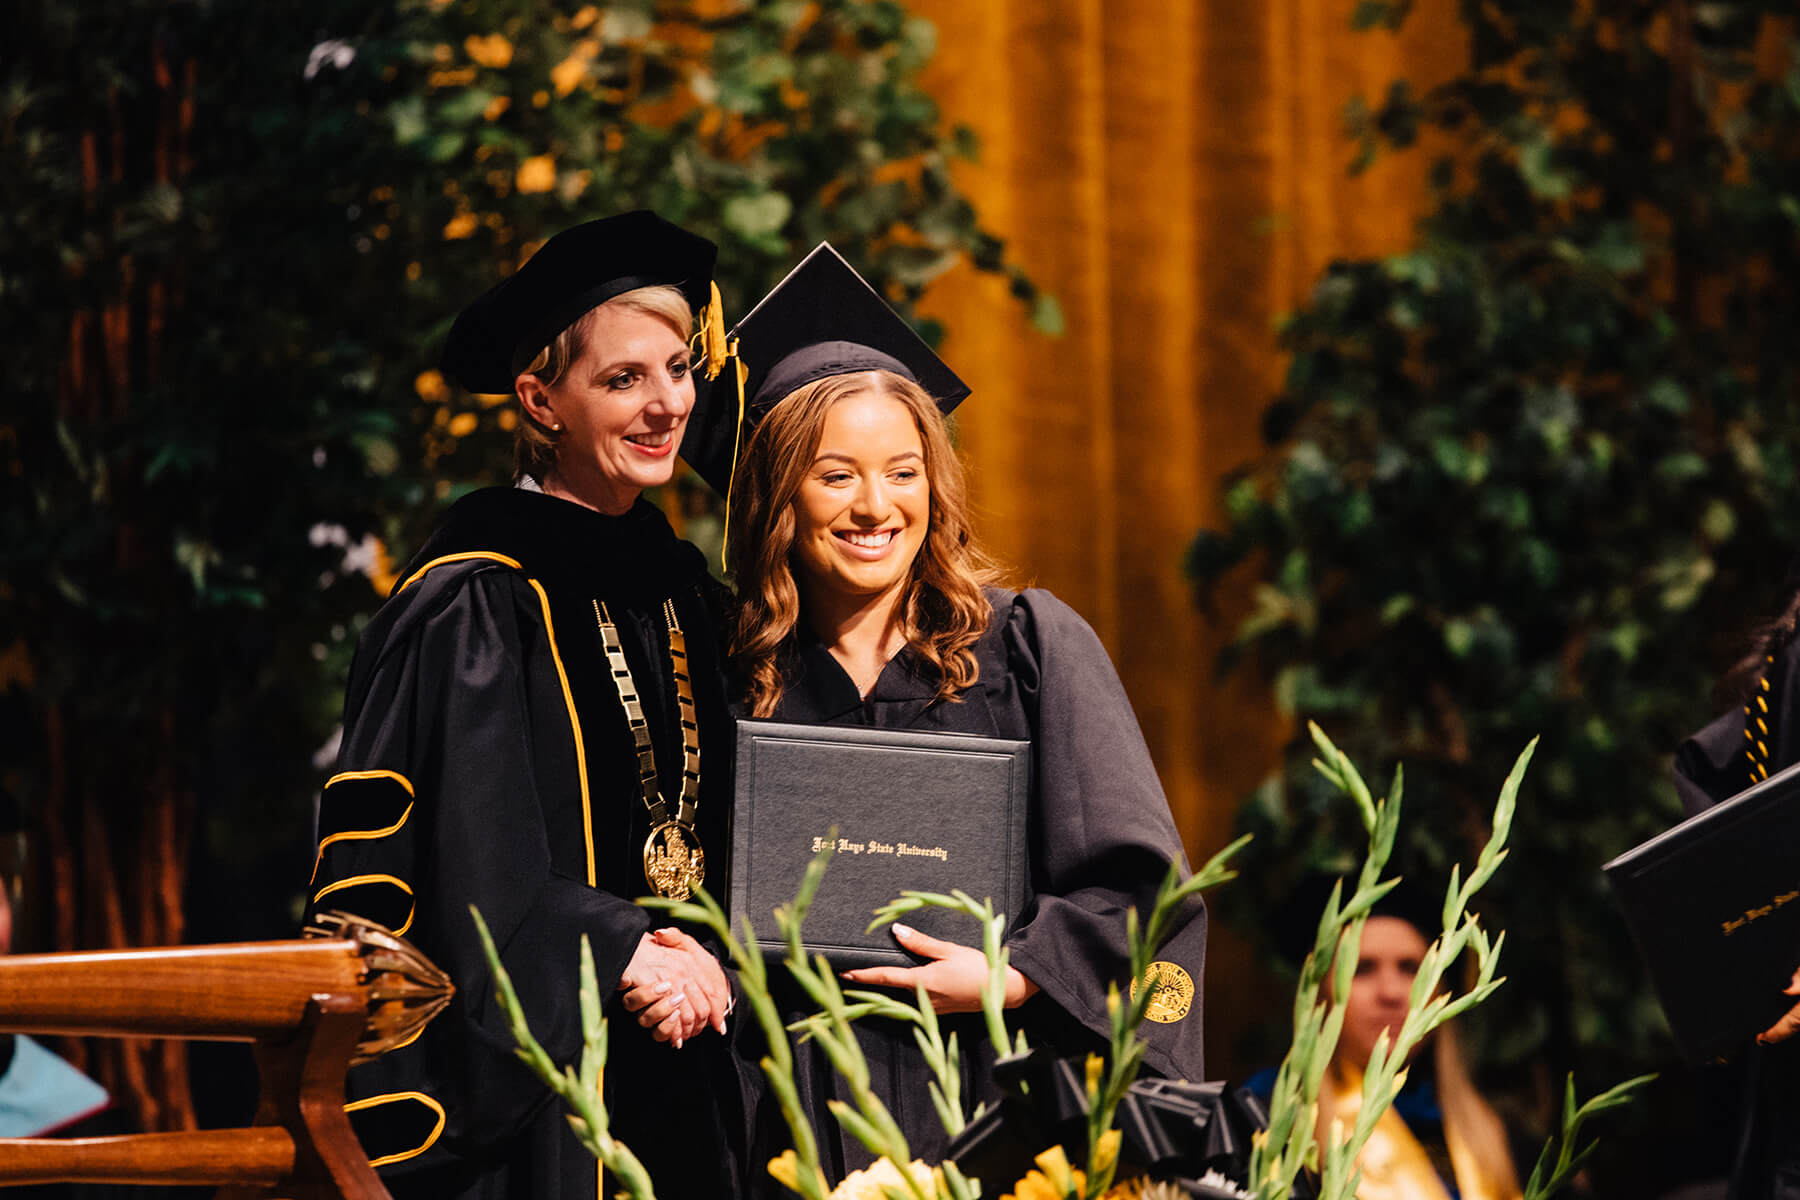 FHSU COMMENCEMENT, SPRING 2021 - Fort Hays State University